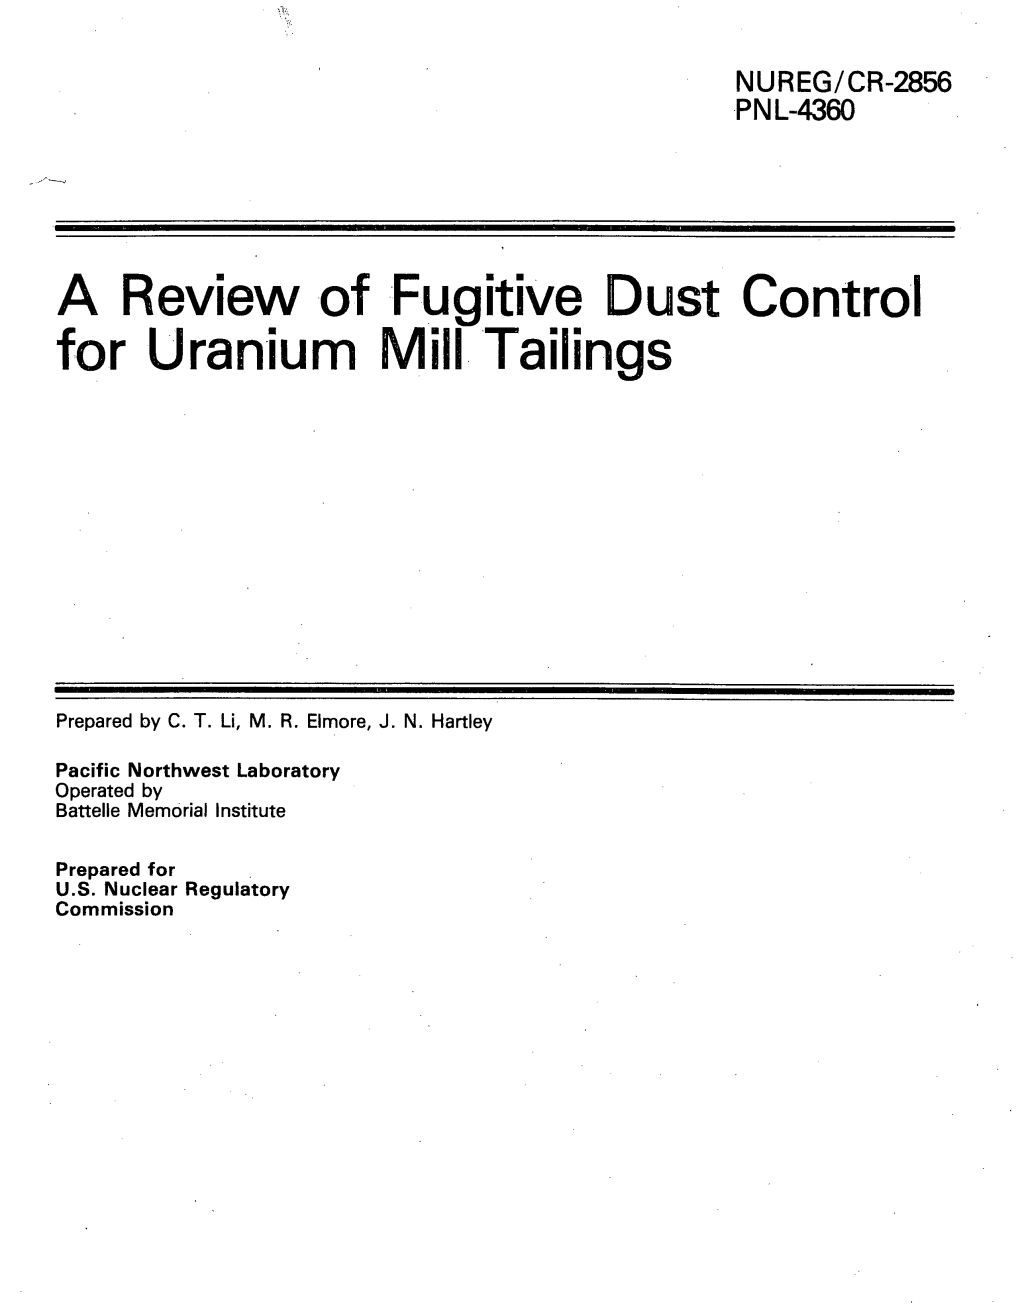 "A Review of Fugitive Dust Control for Uranium Mill Tailings"